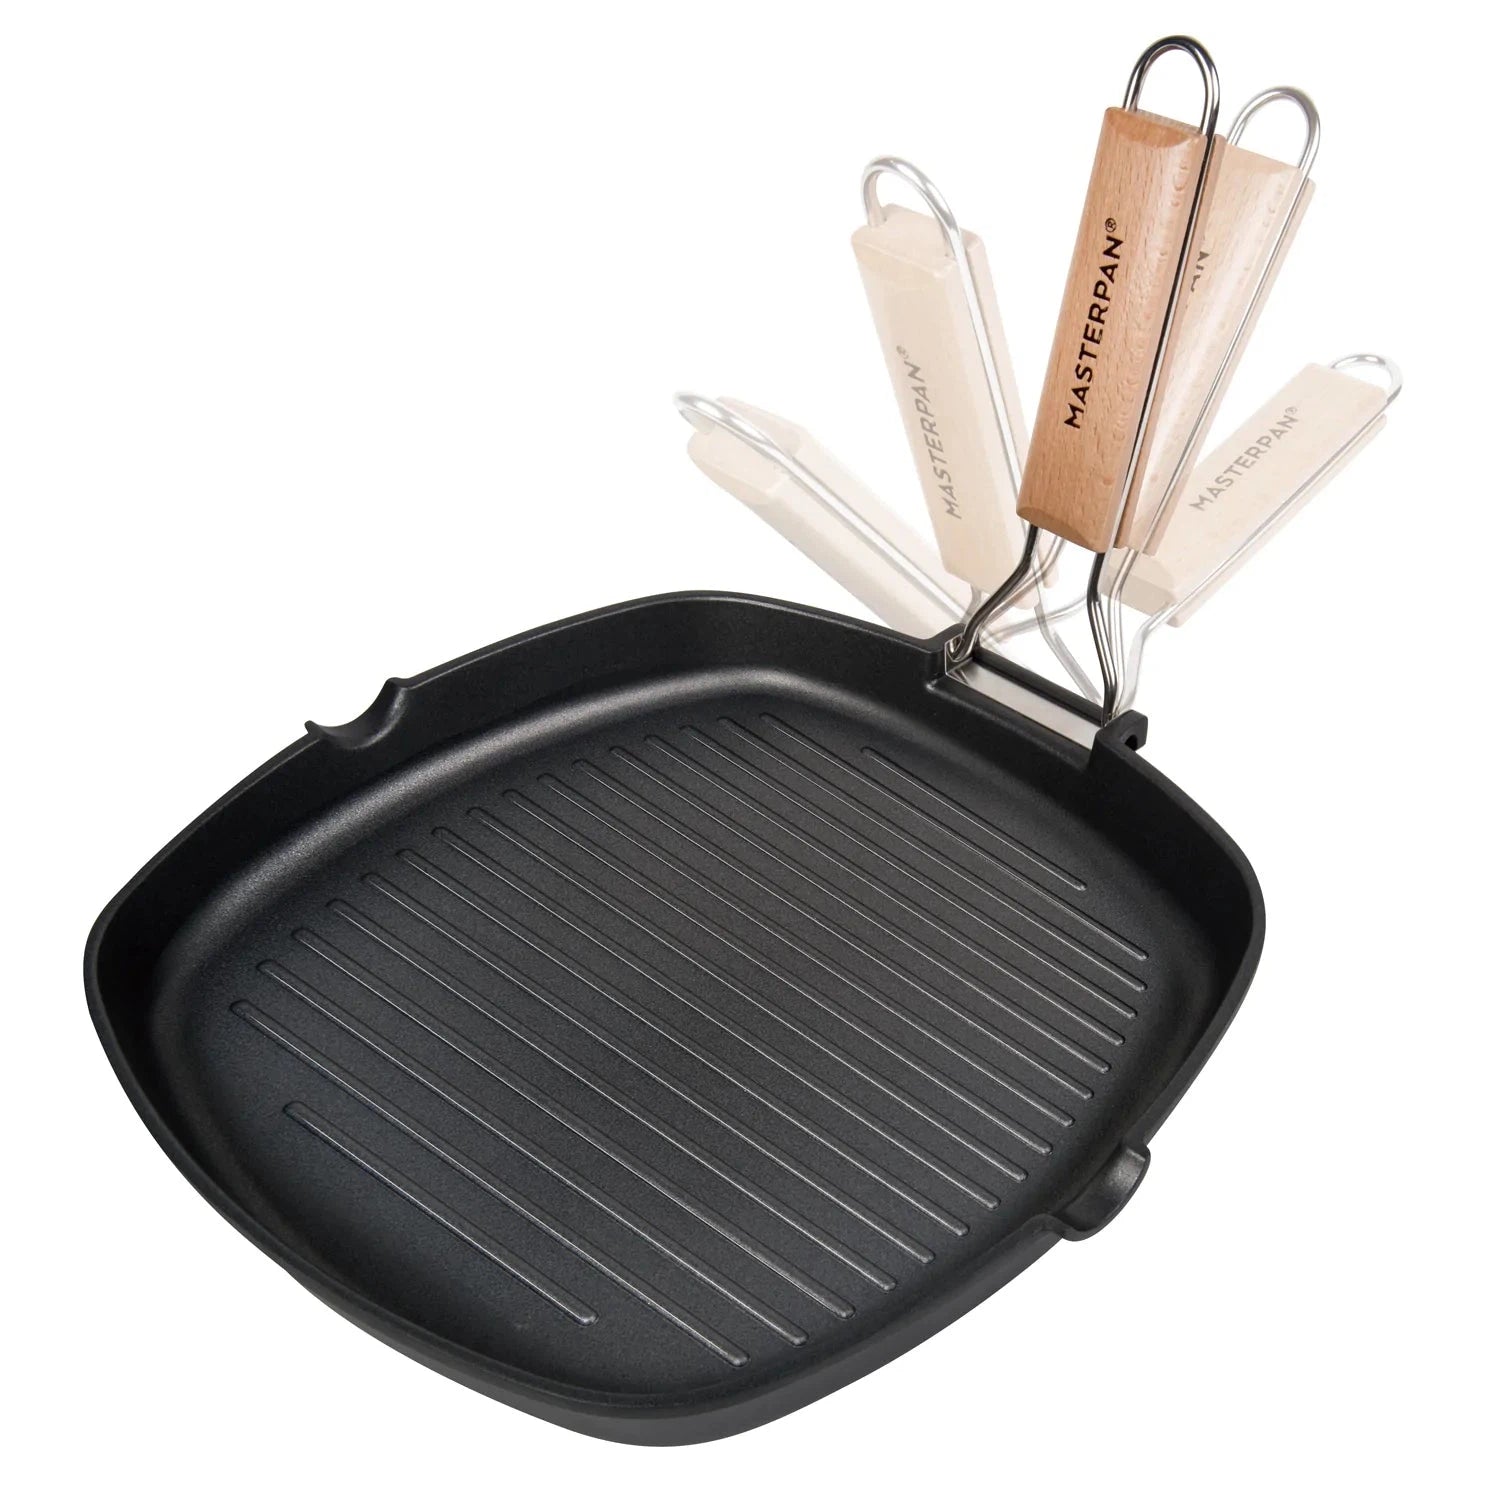 MasterPan Non-Stick 15 in. Divided Grill/Fry/Oven Meal Skillet 